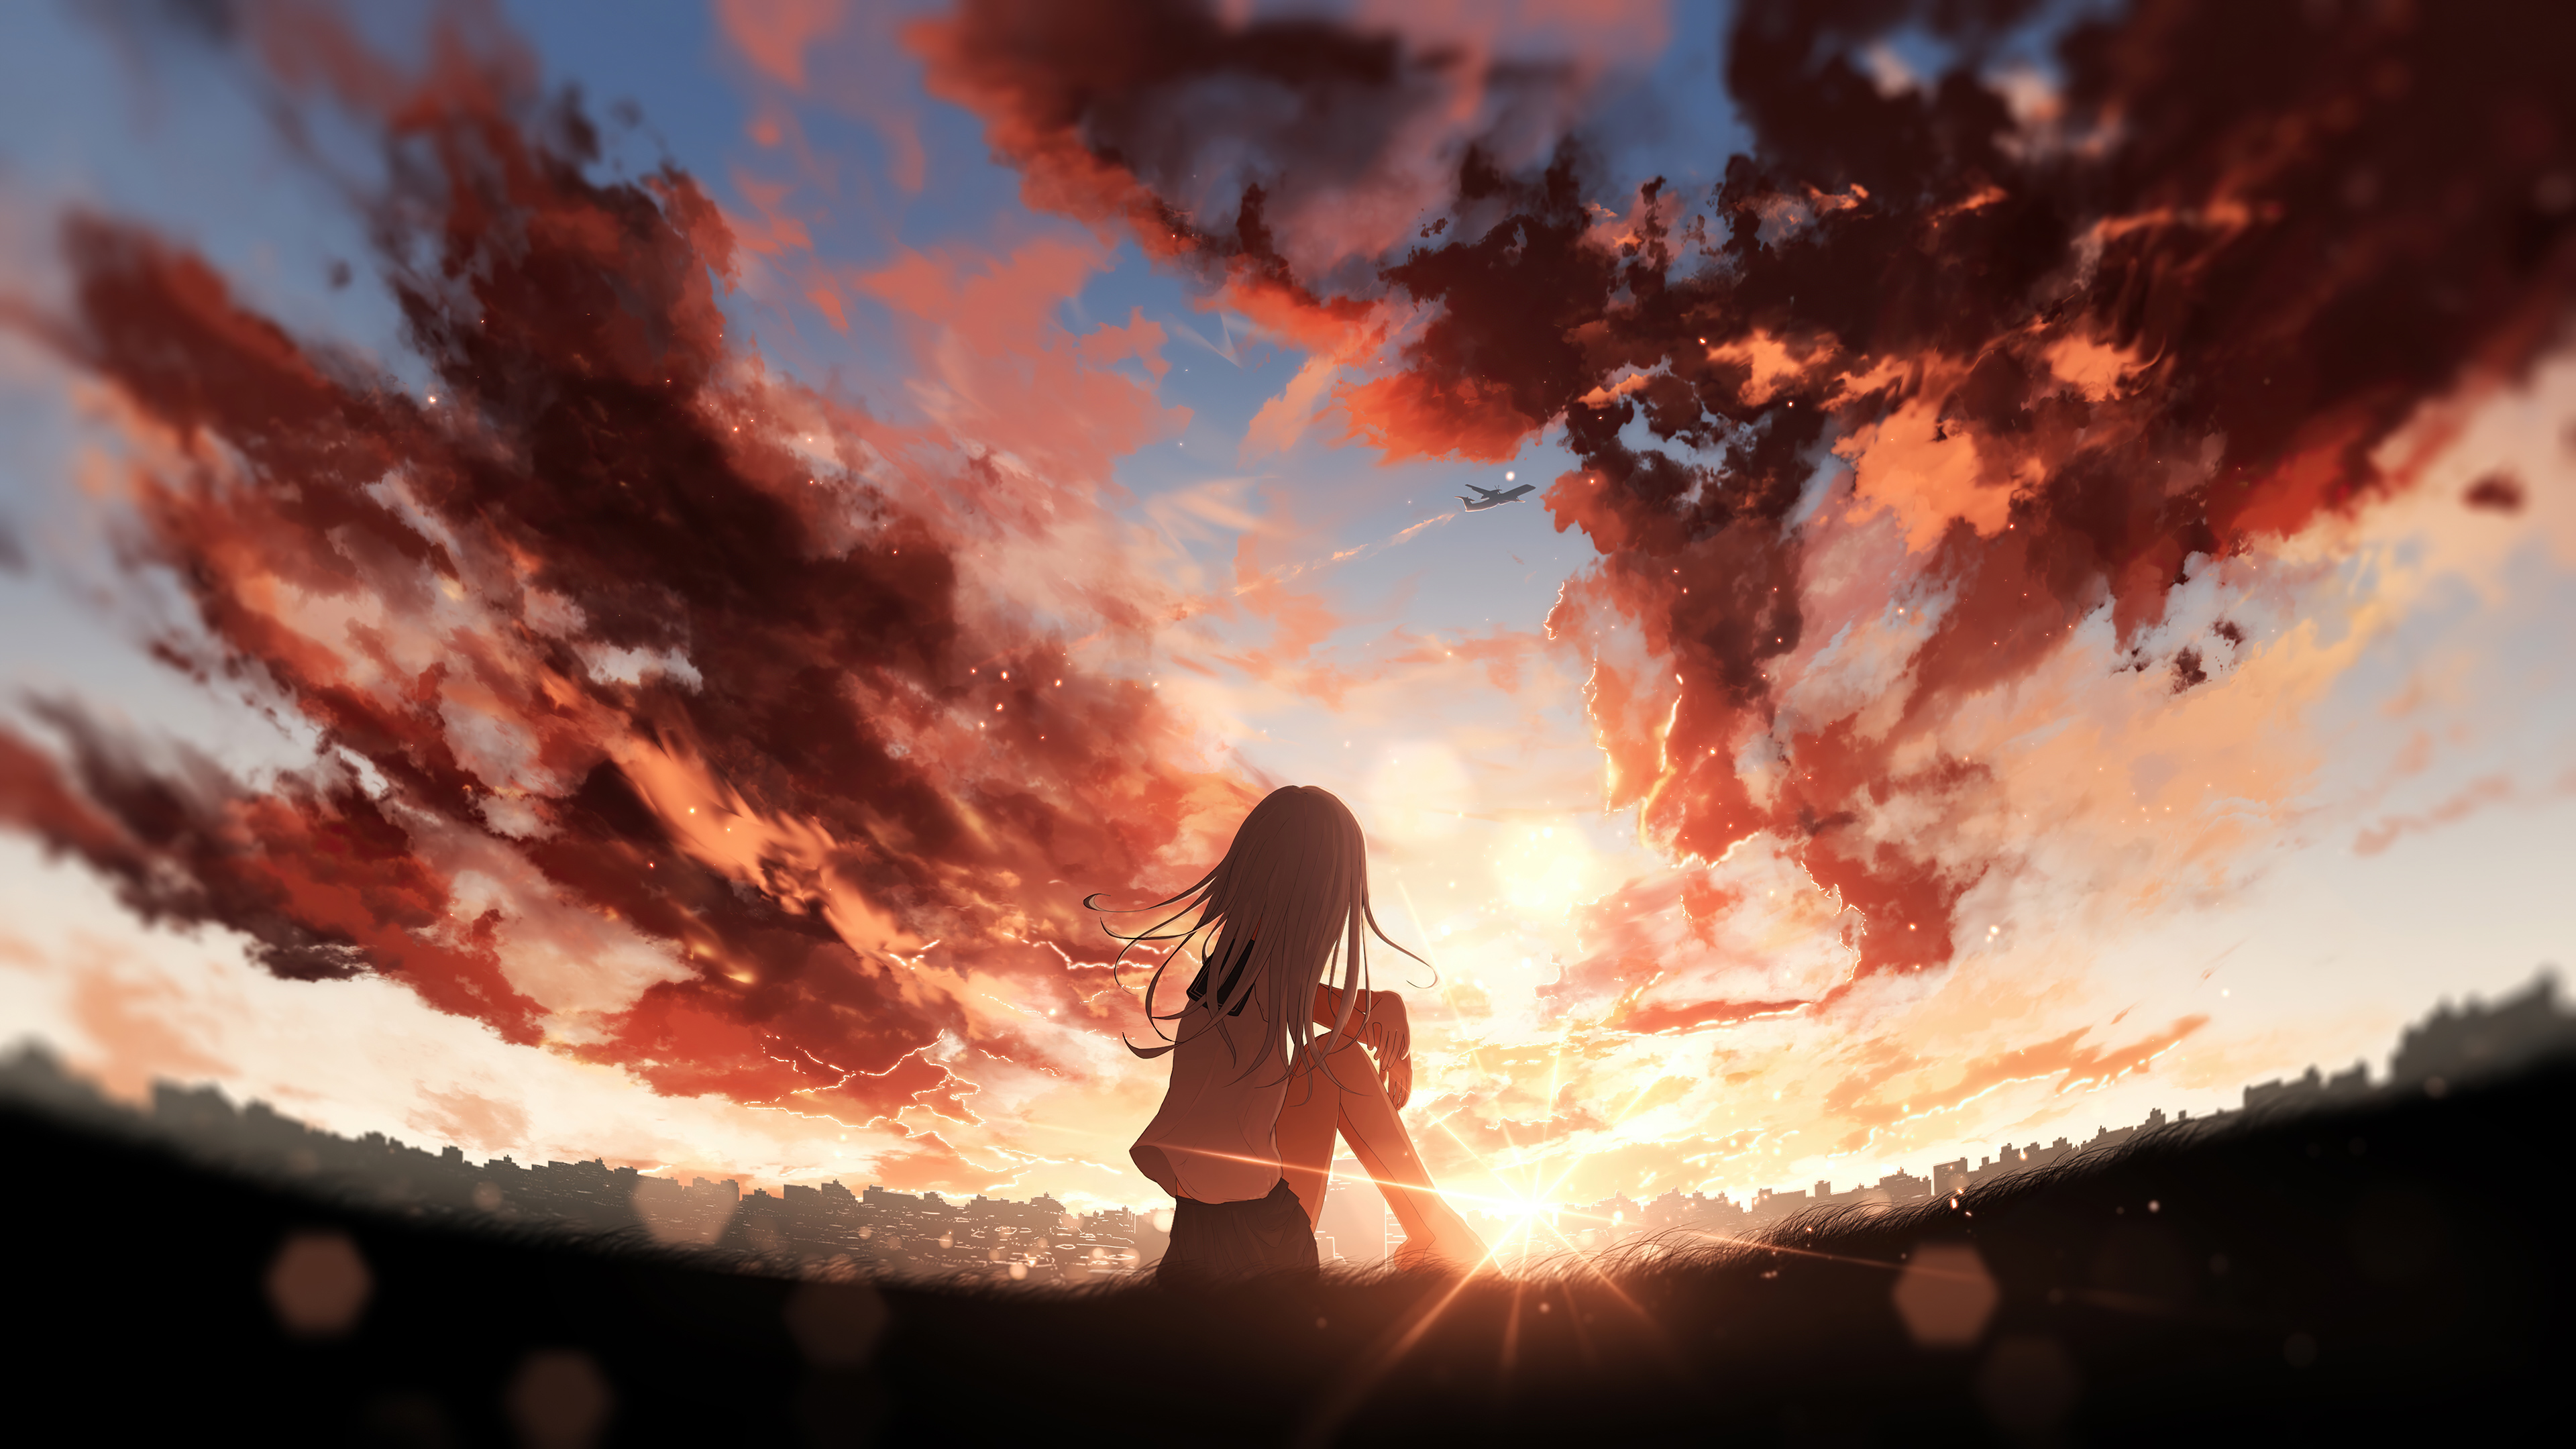 Solitary Beach Sunset Contemplation in Anime Style | MUSE AI